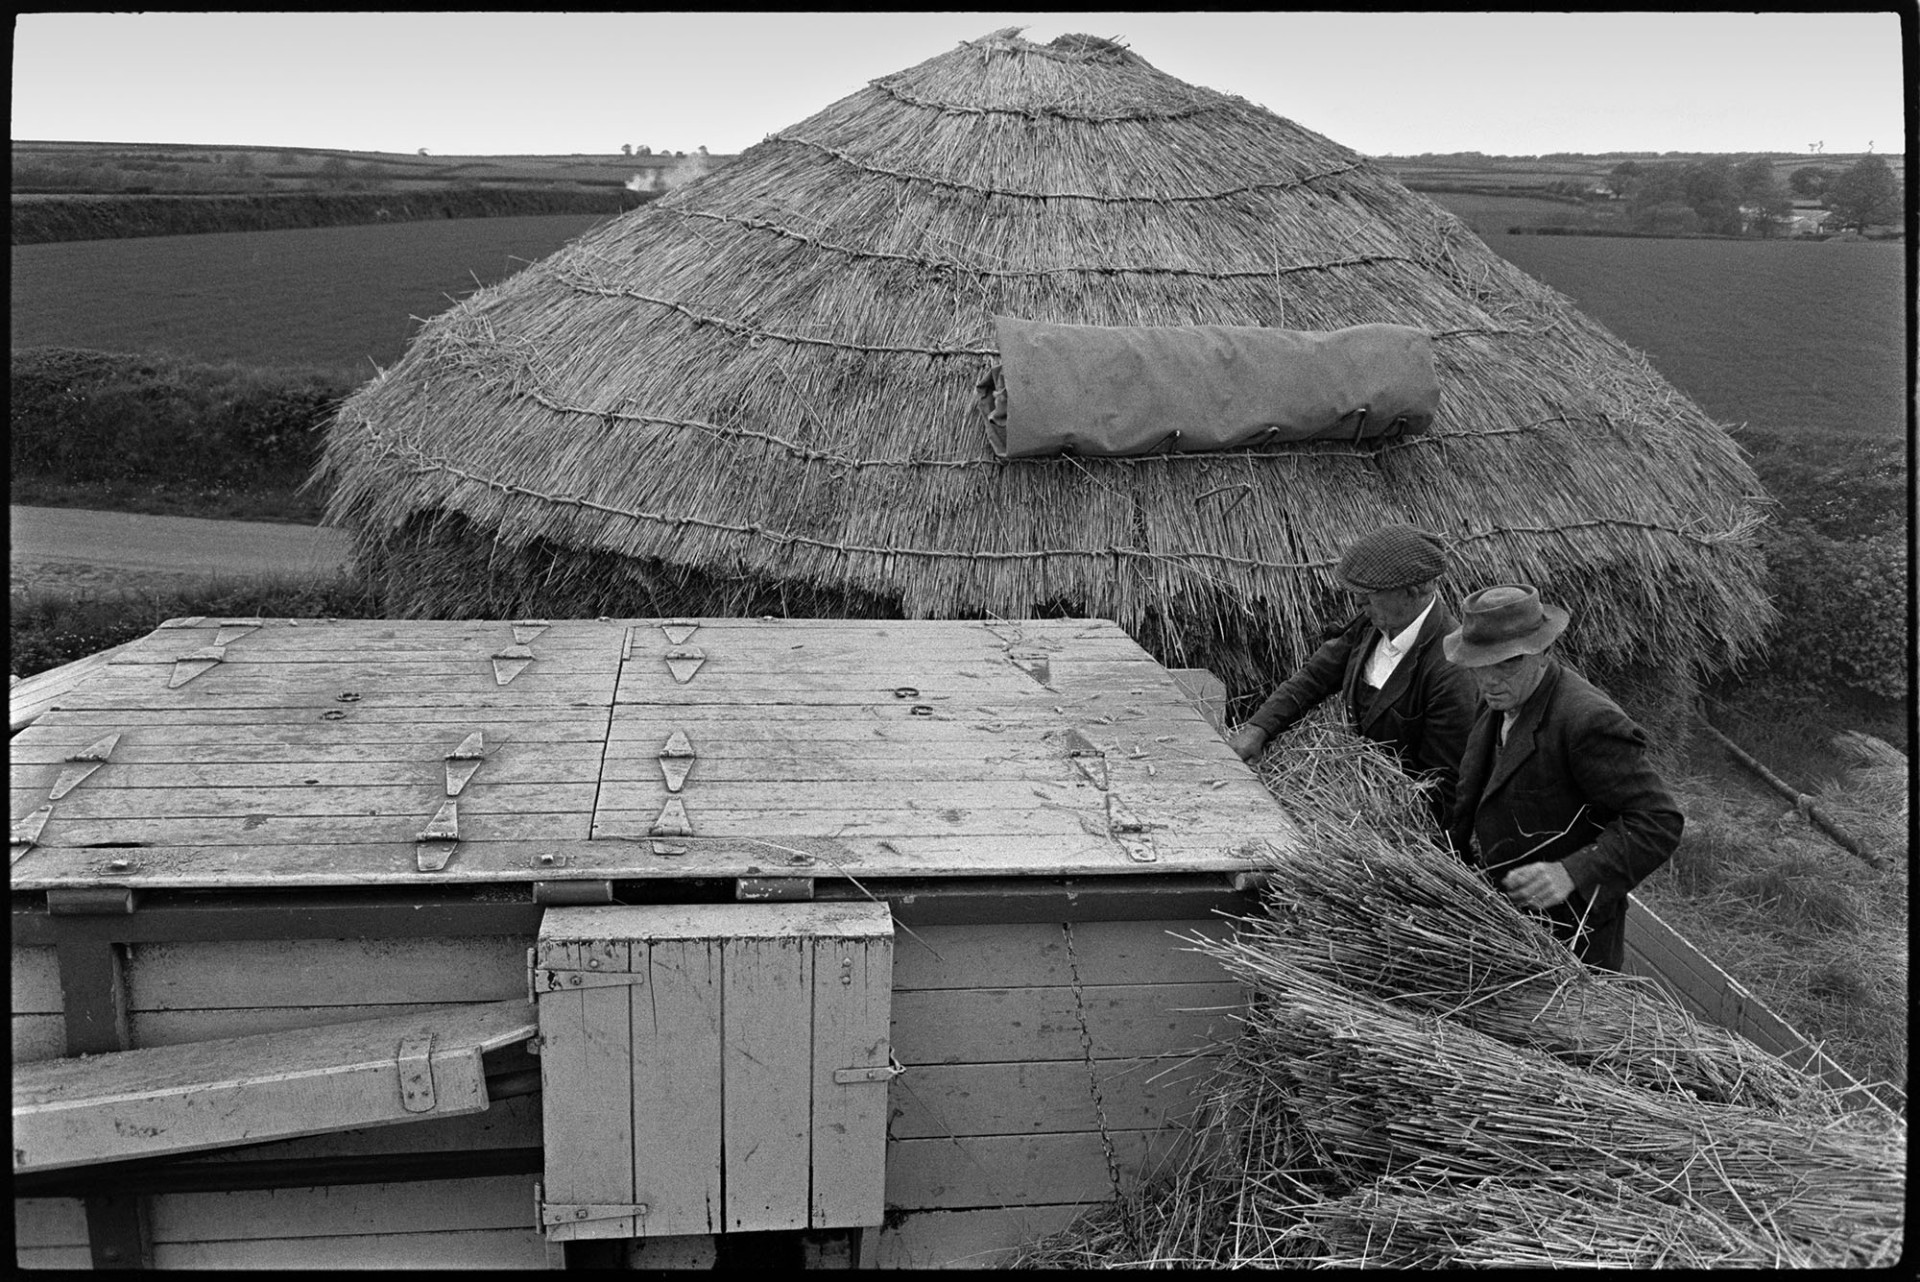 Reed combing, men working, ricks, tractors, etc. <br />
[Two men feeding bundles of reed into a reed comber. The top of the reed comber can be seen and a thatched wheat rick is in the background.]